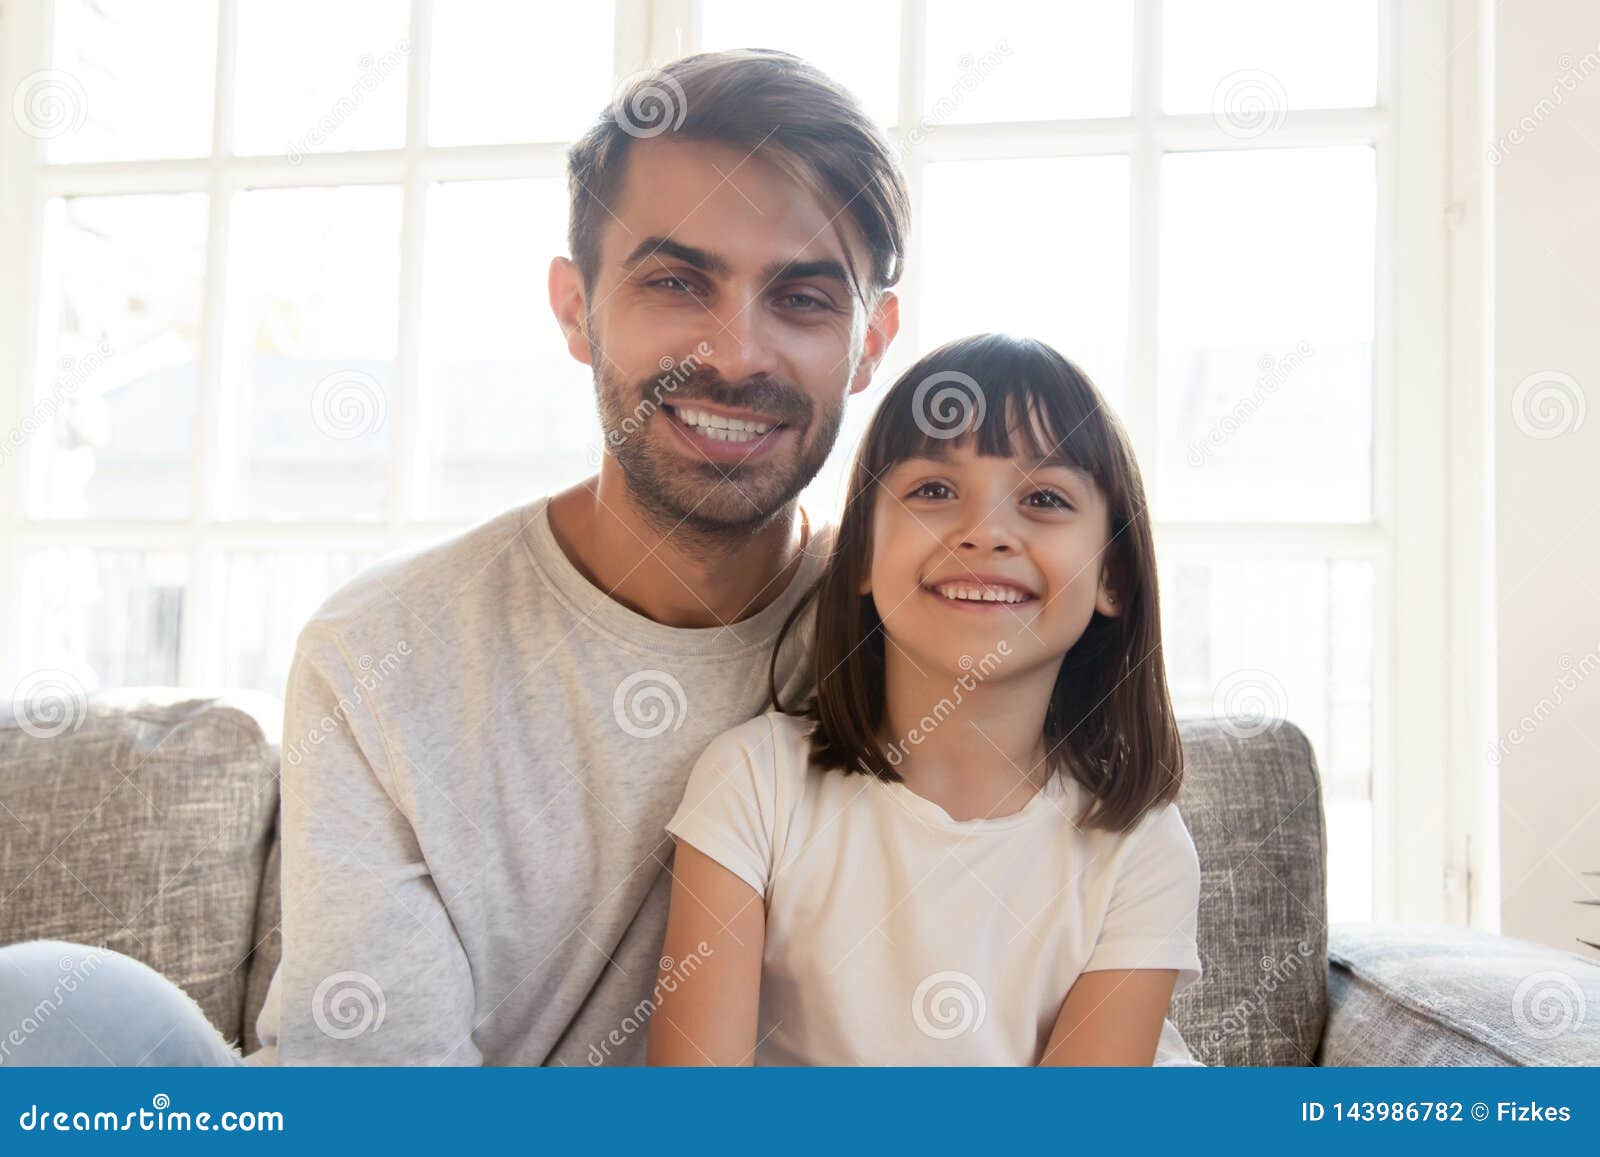 Real dad and daughter on webcam